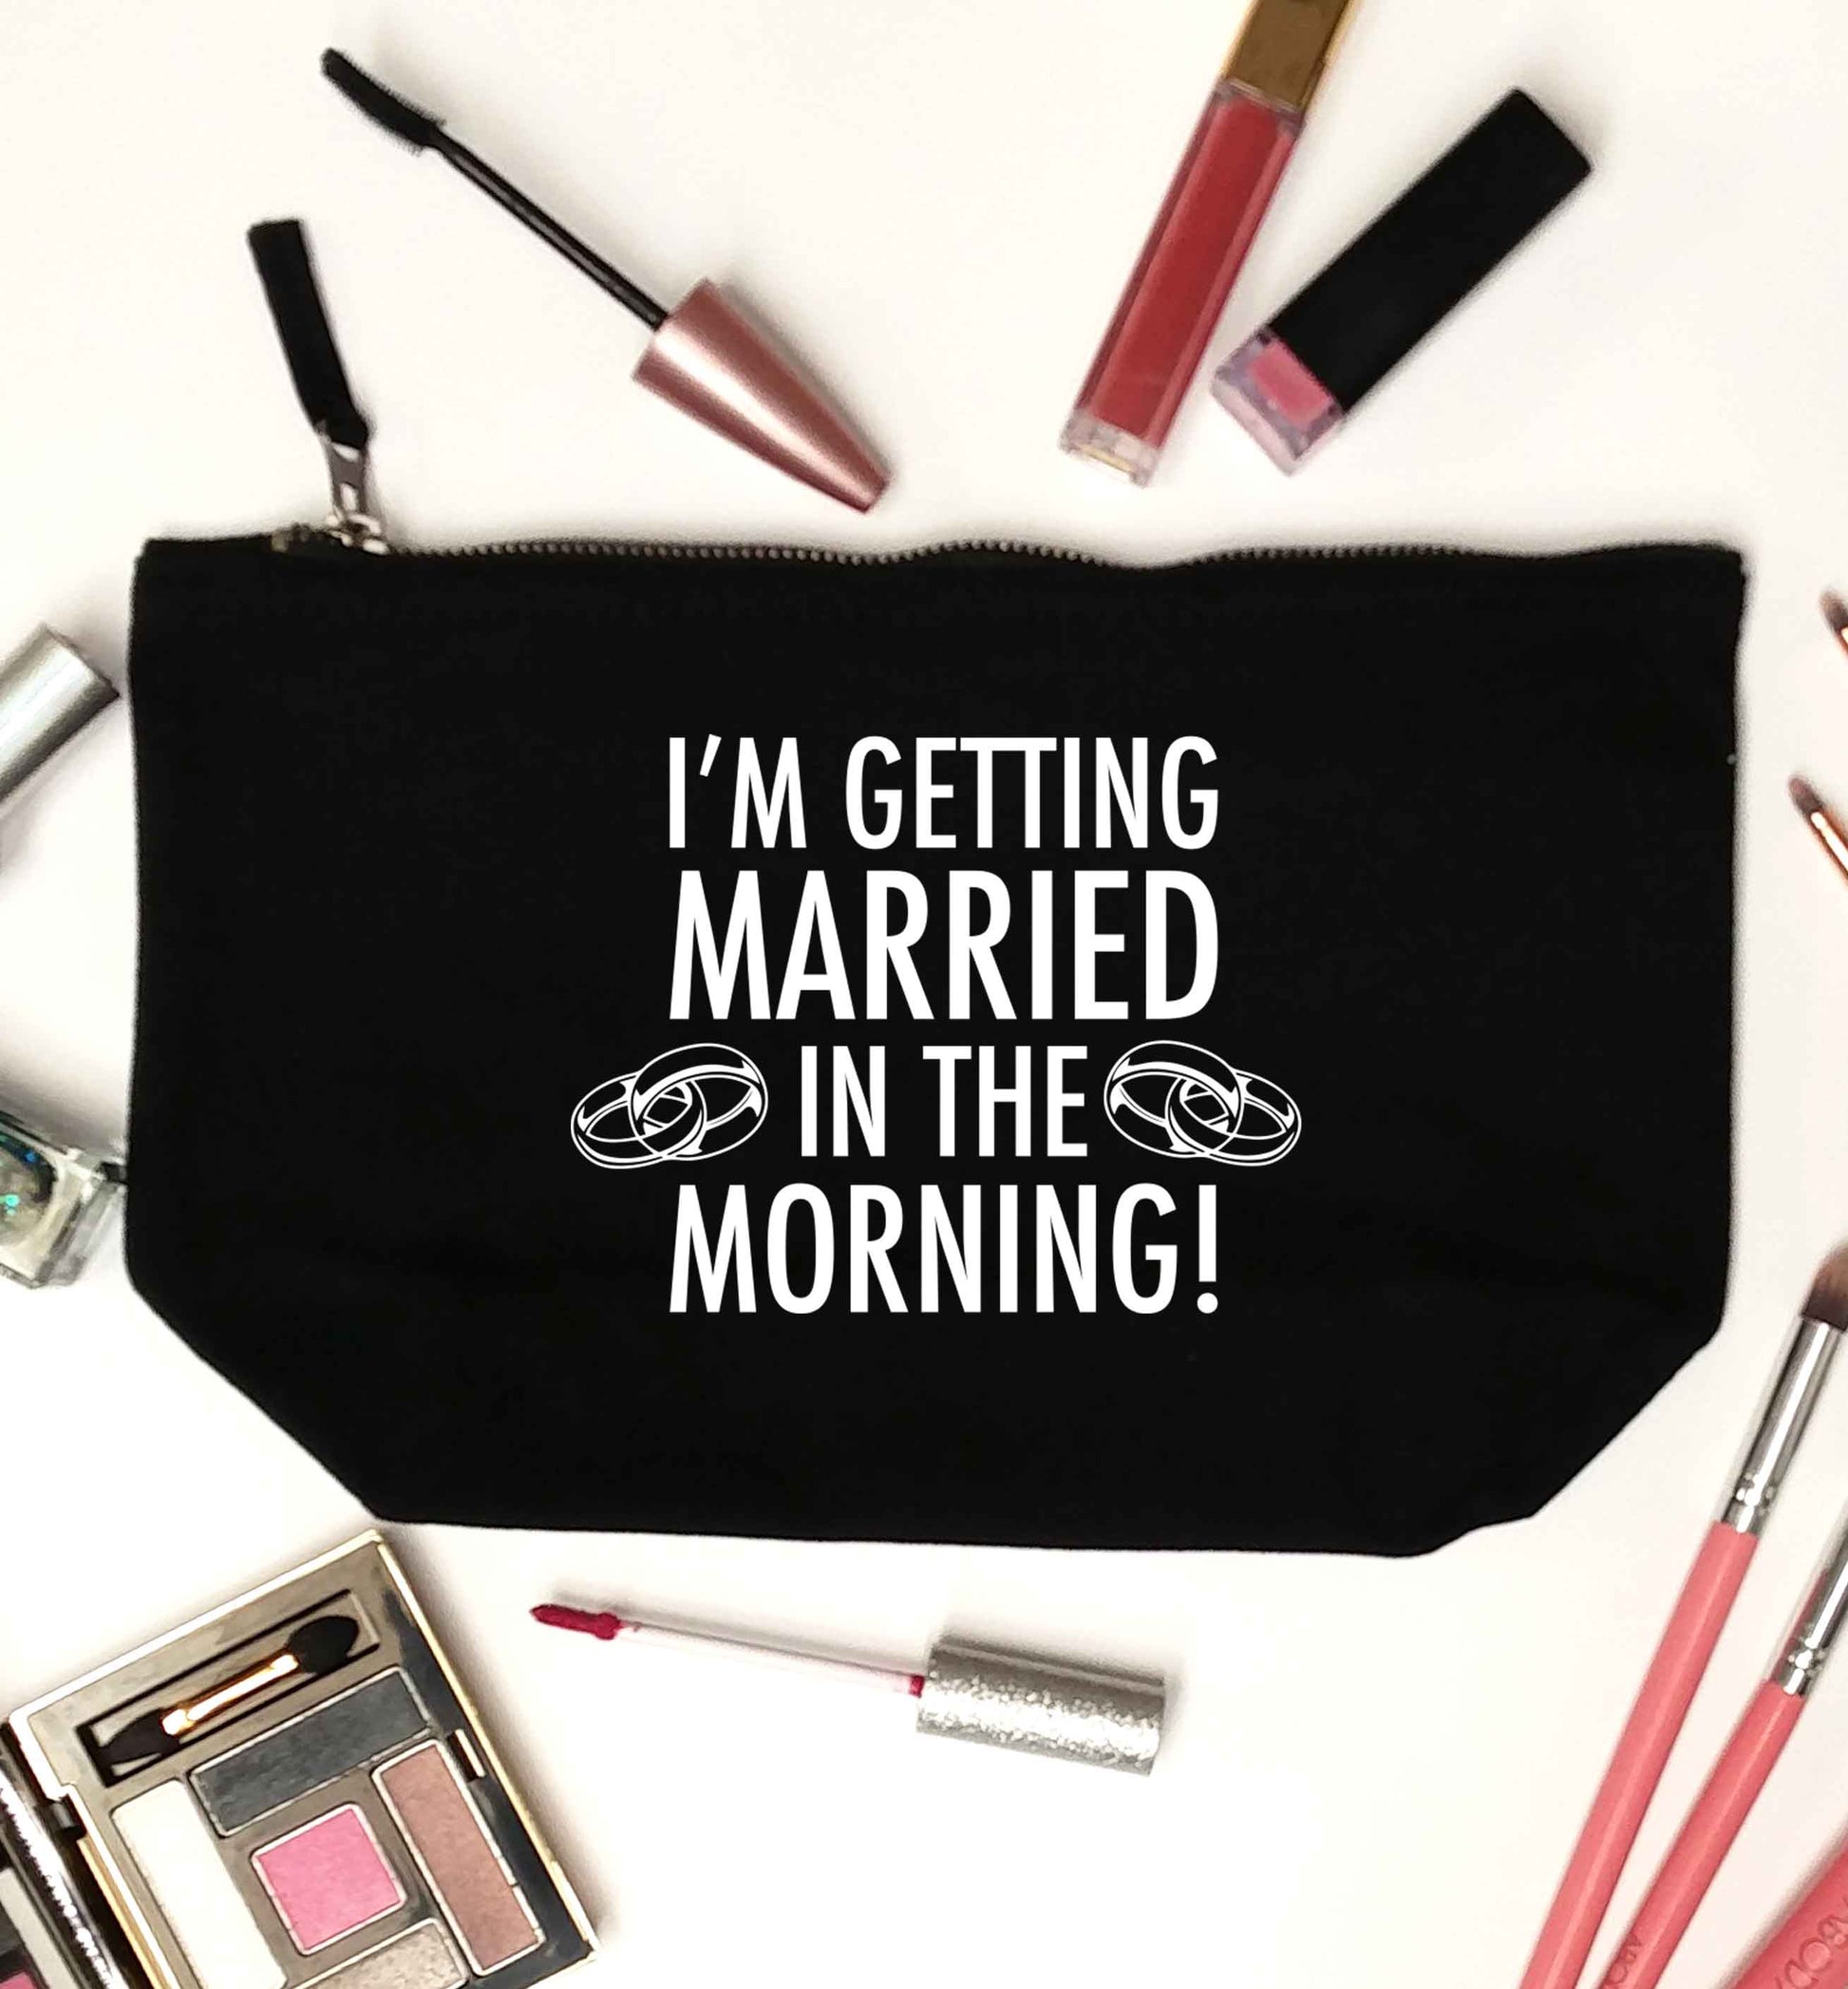 I'm getting married in the morning! black makeup bag